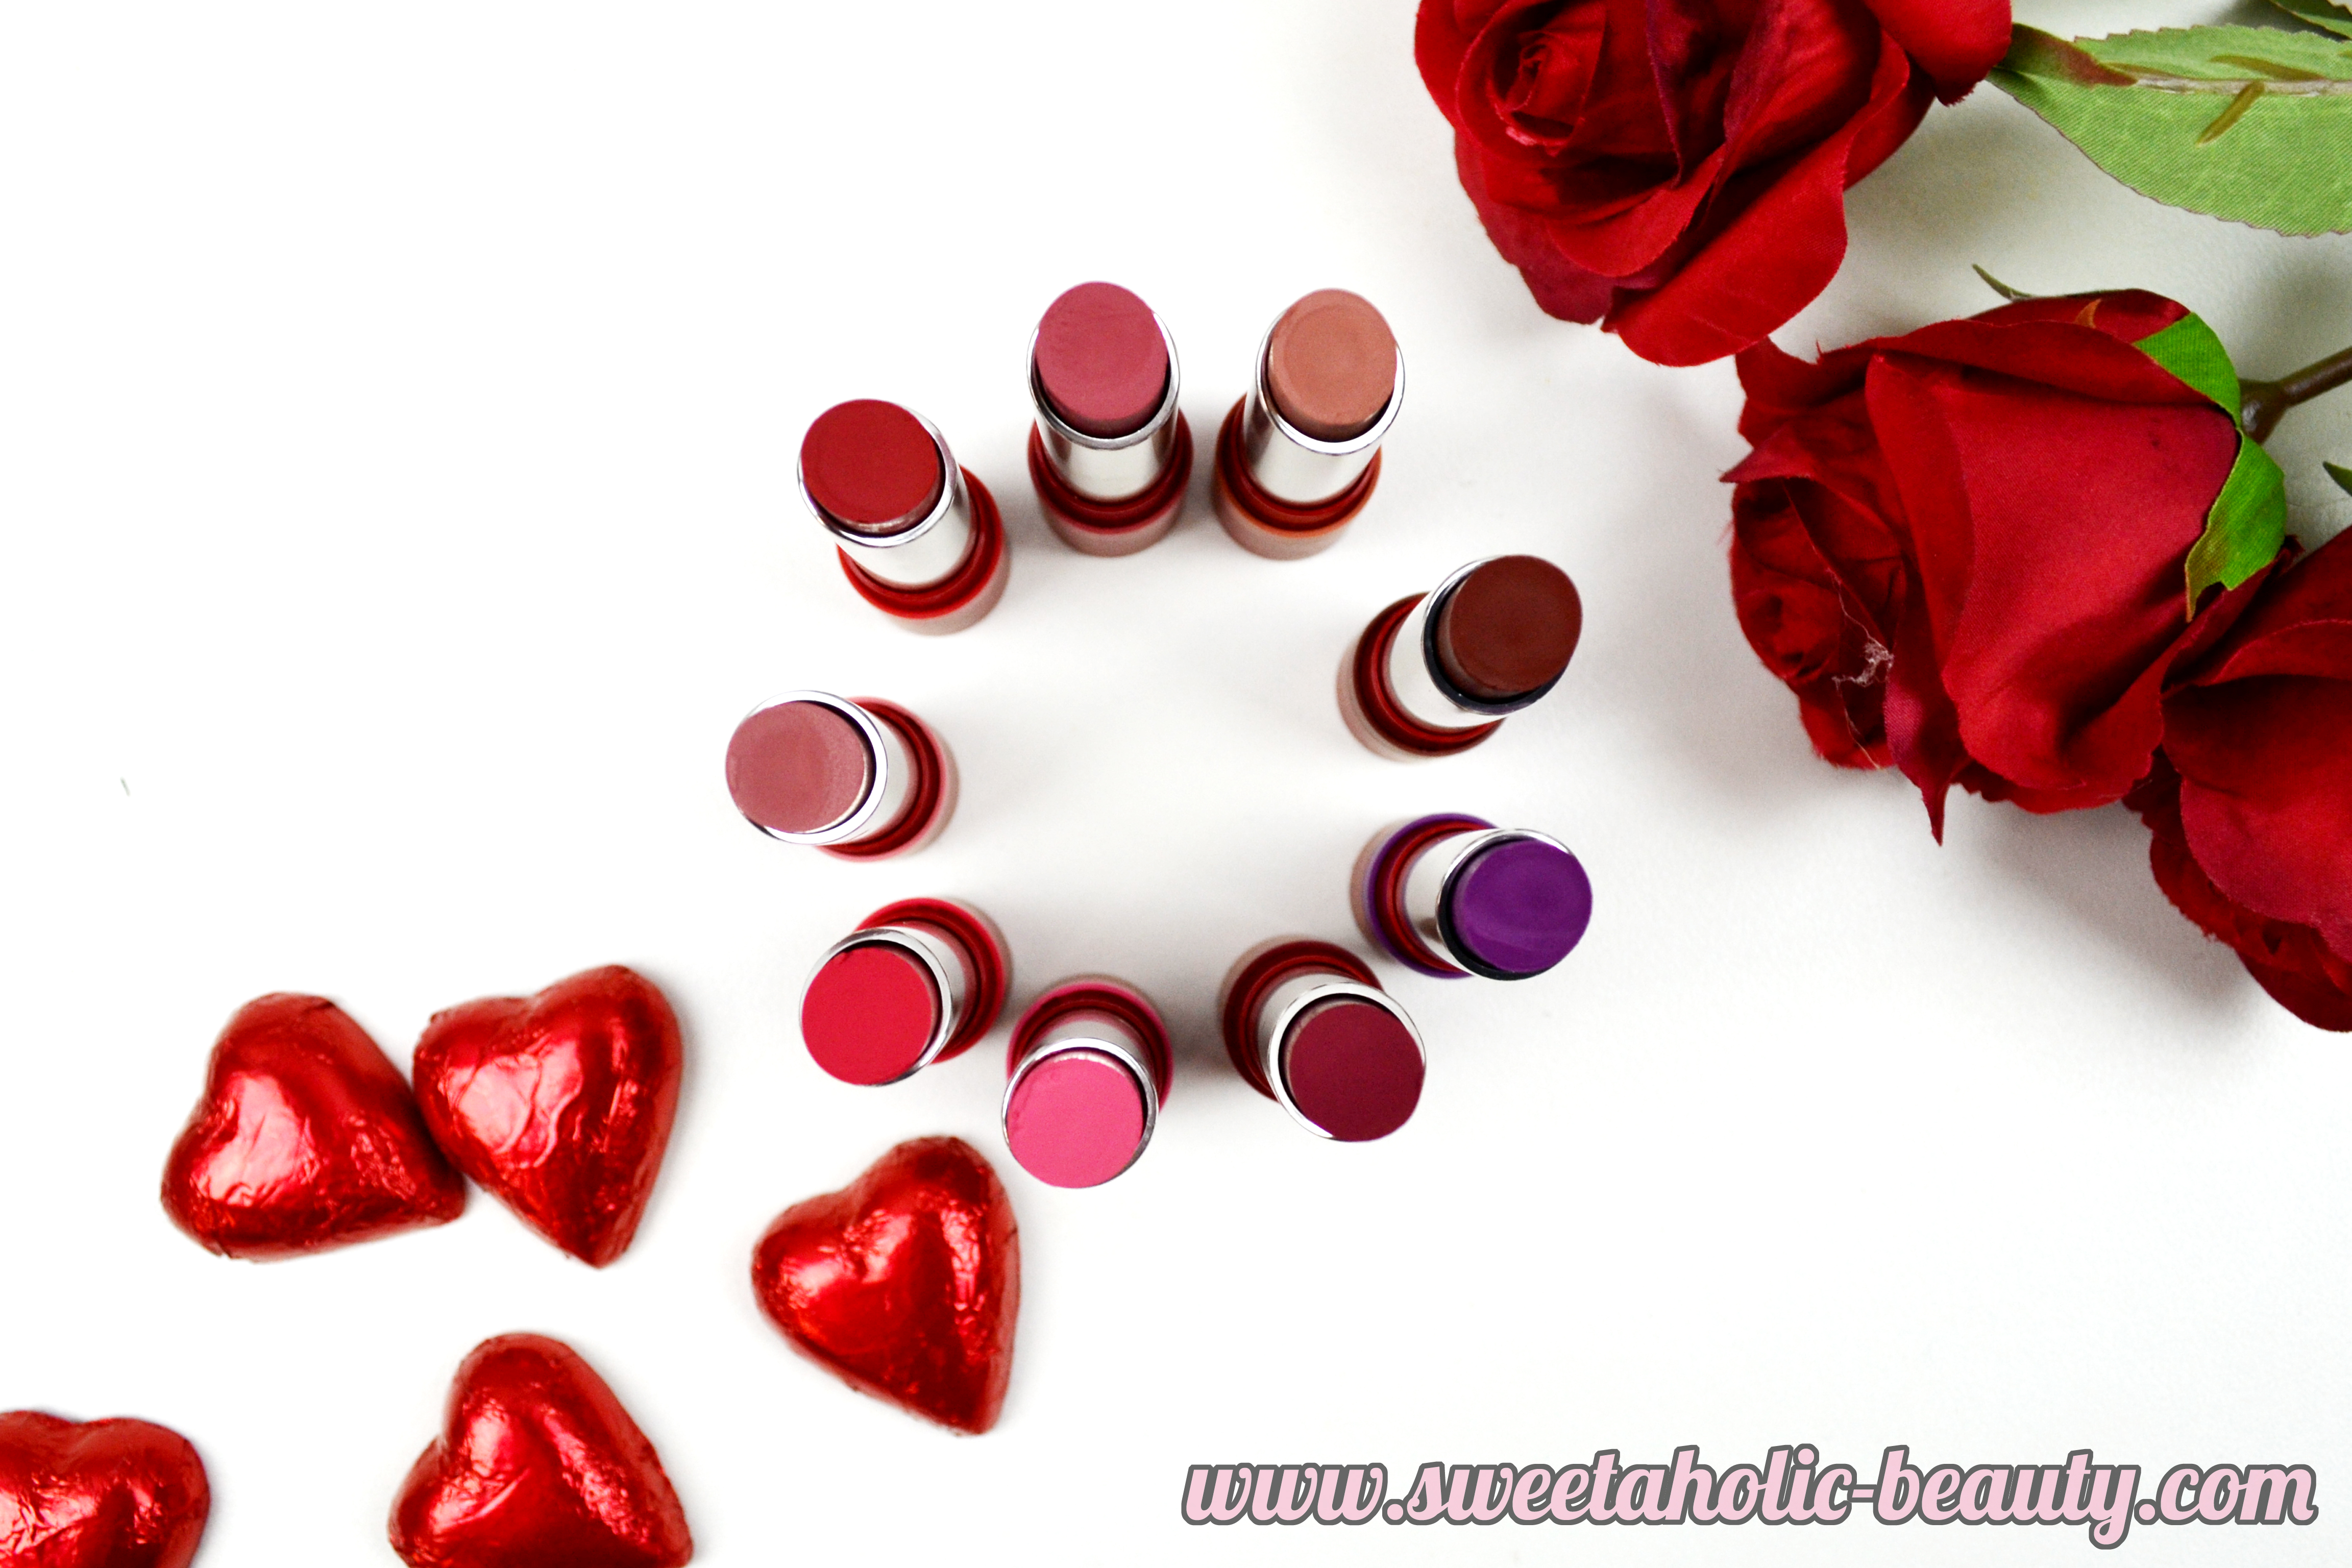 Rimmel London The Only 1 Matte Lipstick Collection Review & Swatches - Sweetaholic Beauty